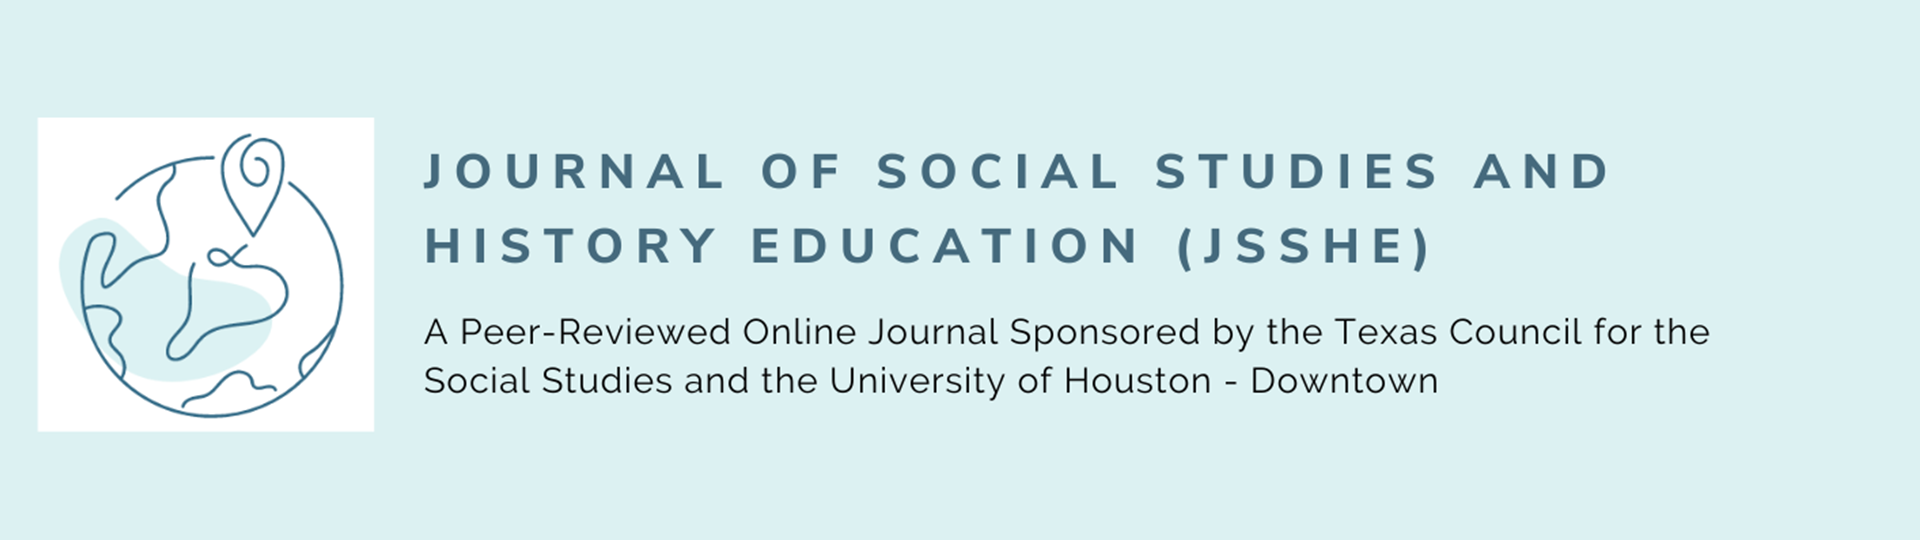 Journal of Social Studies and History Education